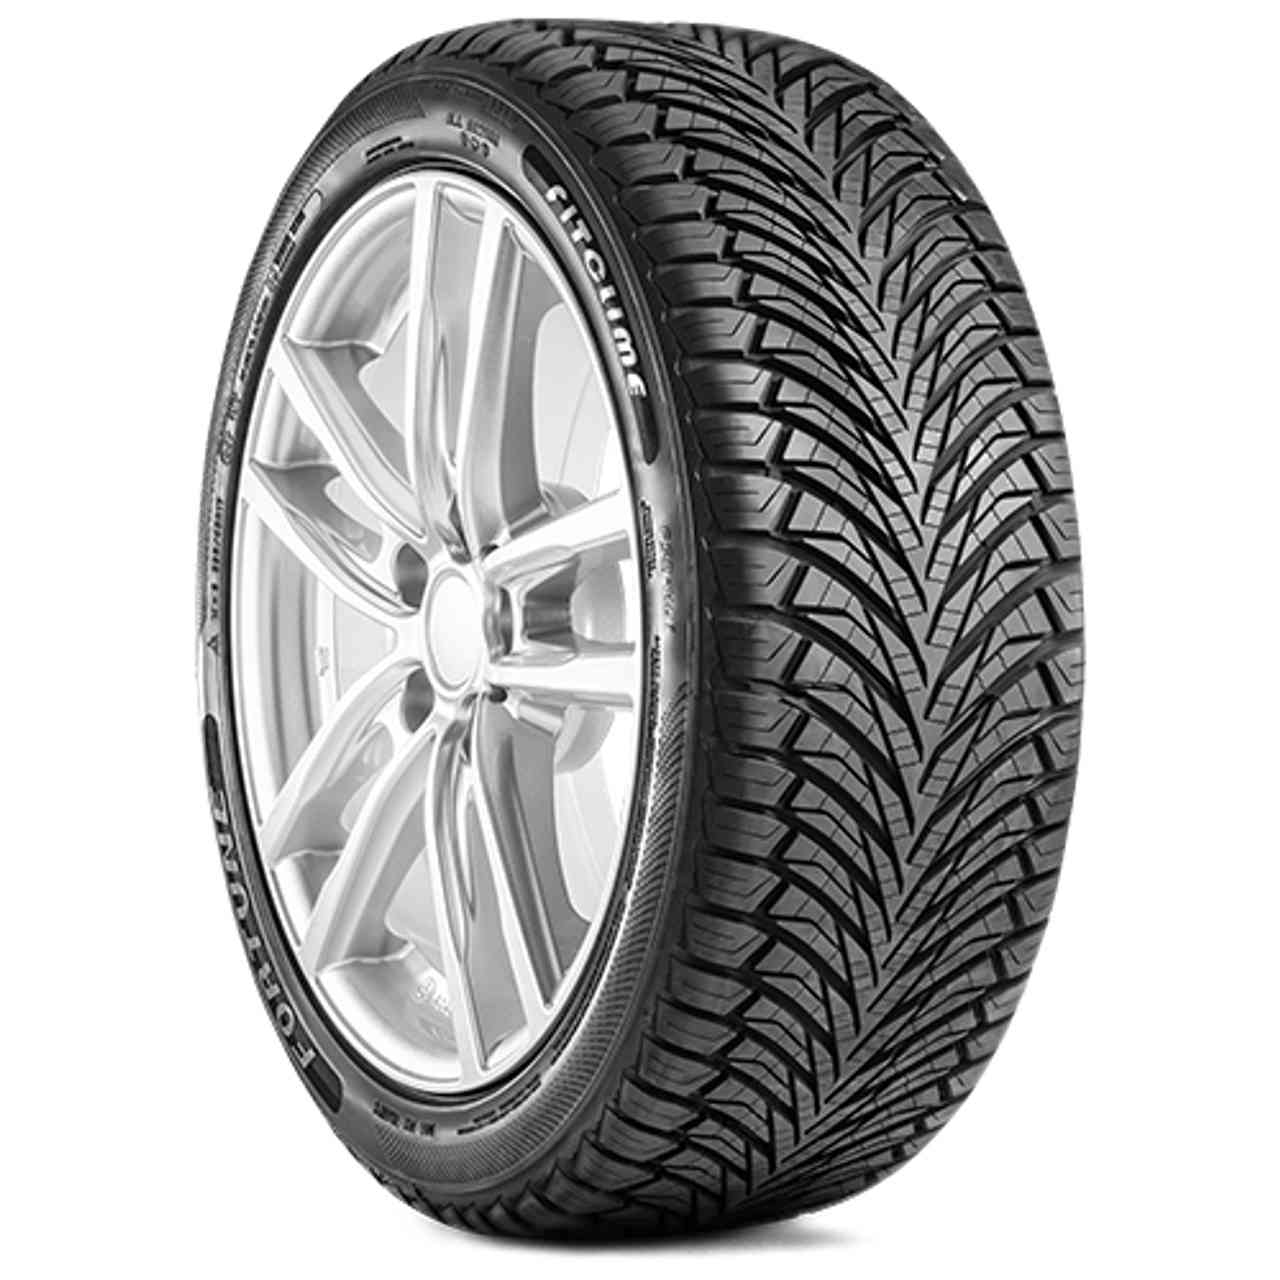 FORTUNE FITCLIME FSR-401 185/60R15 88H BSW